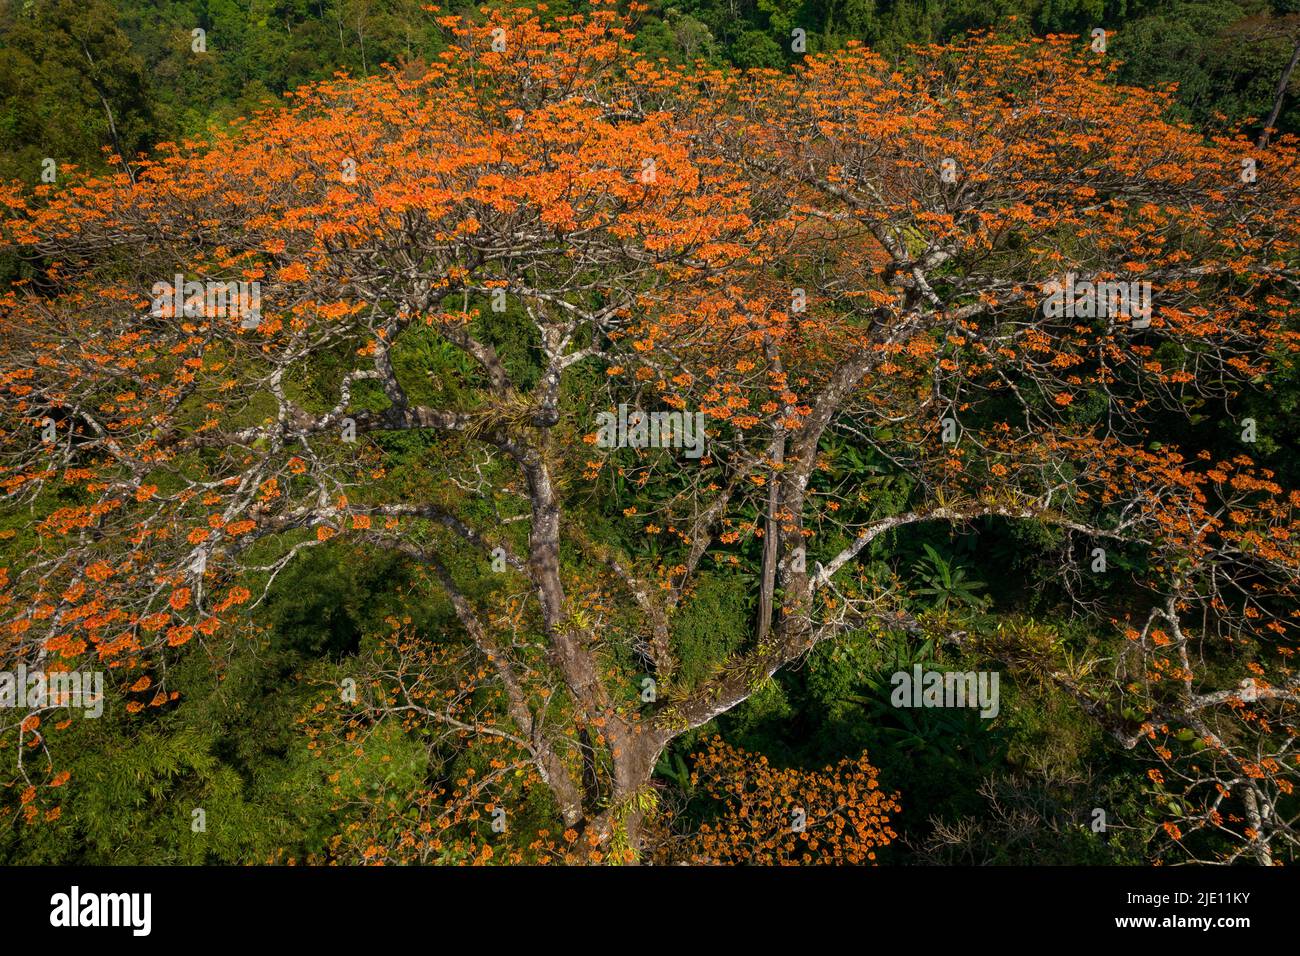 Aerial view of a large Pterocymbium macranthum . tree in full blossom, Chiang dao rainforest, Thailand Stock Photo